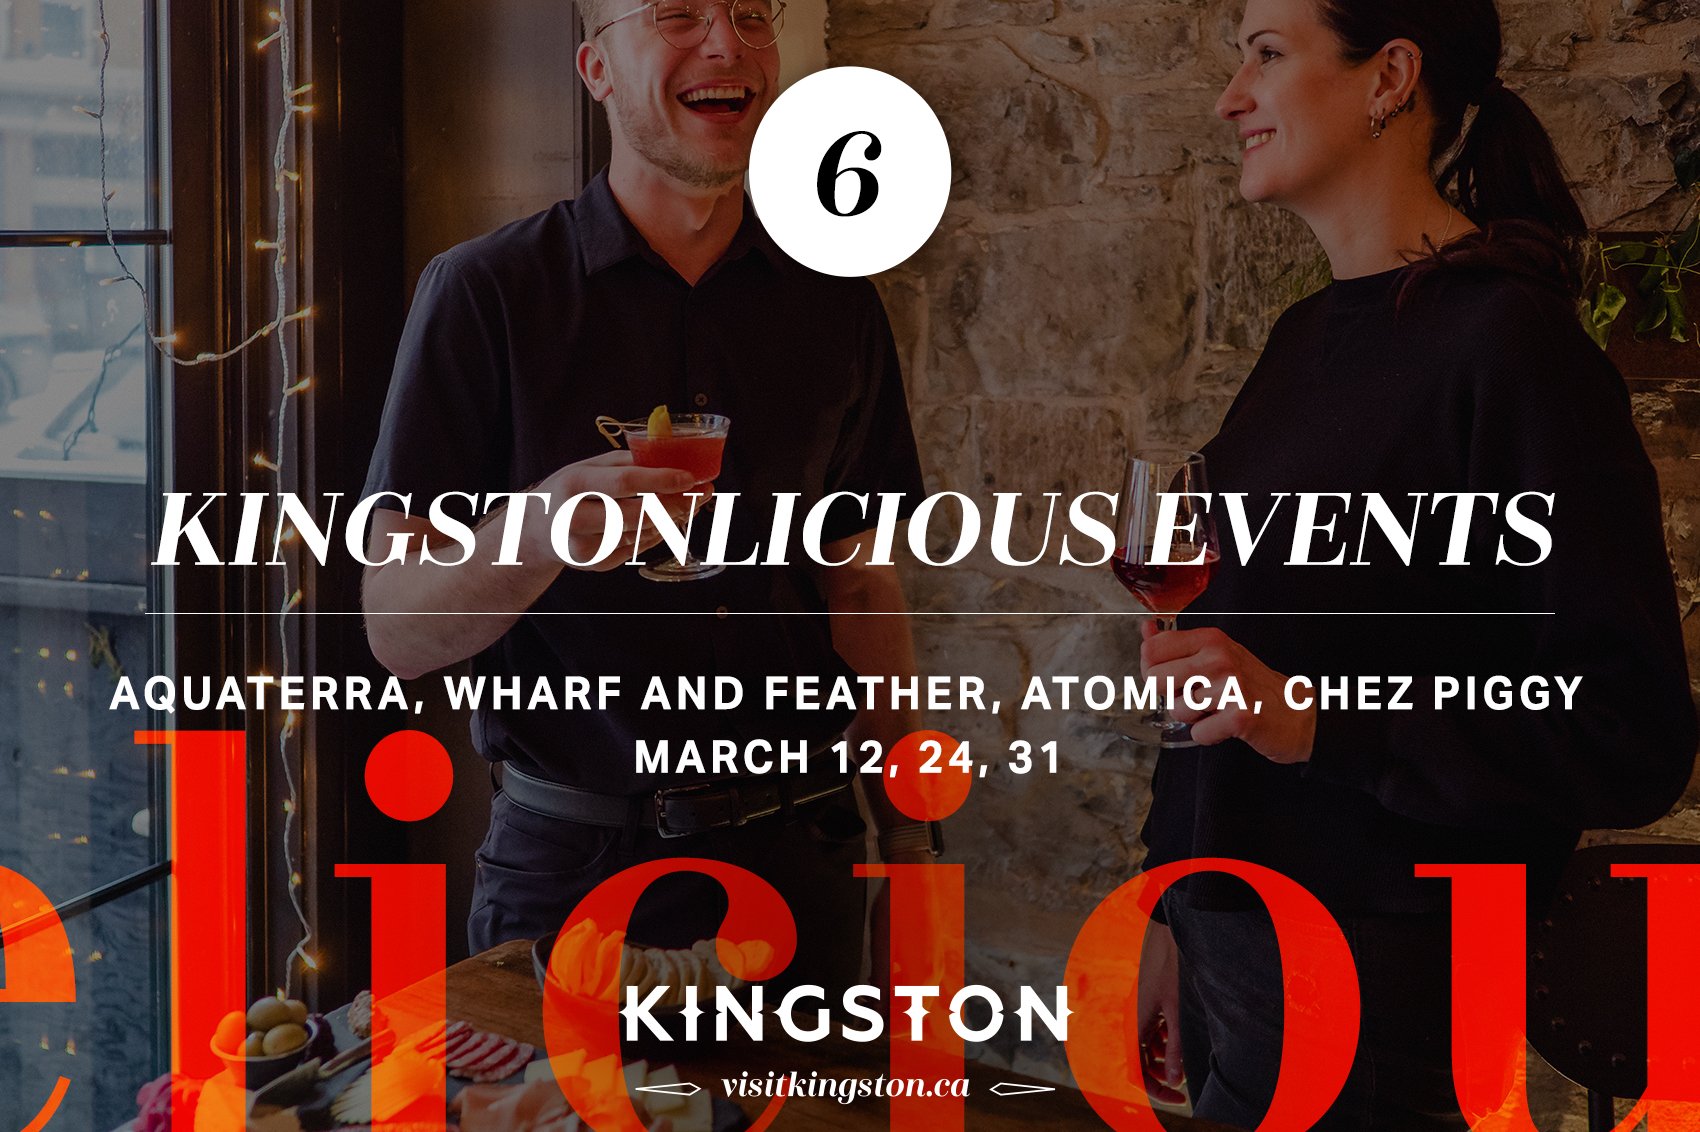 Kingstonlicious events